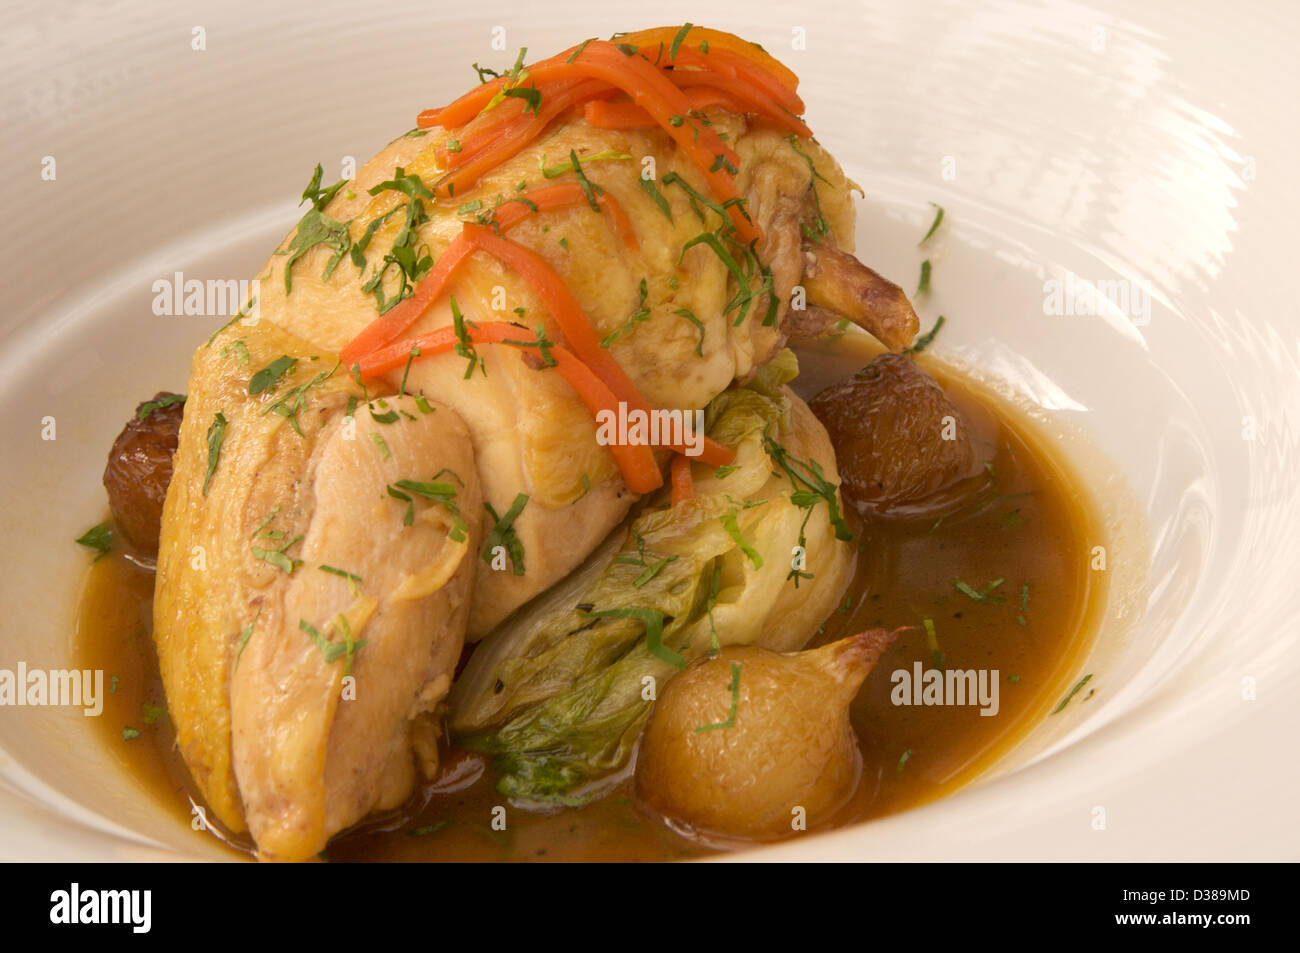 Pot roasted chicken with braised baby gem lettuce and pearl onions Stock Photo